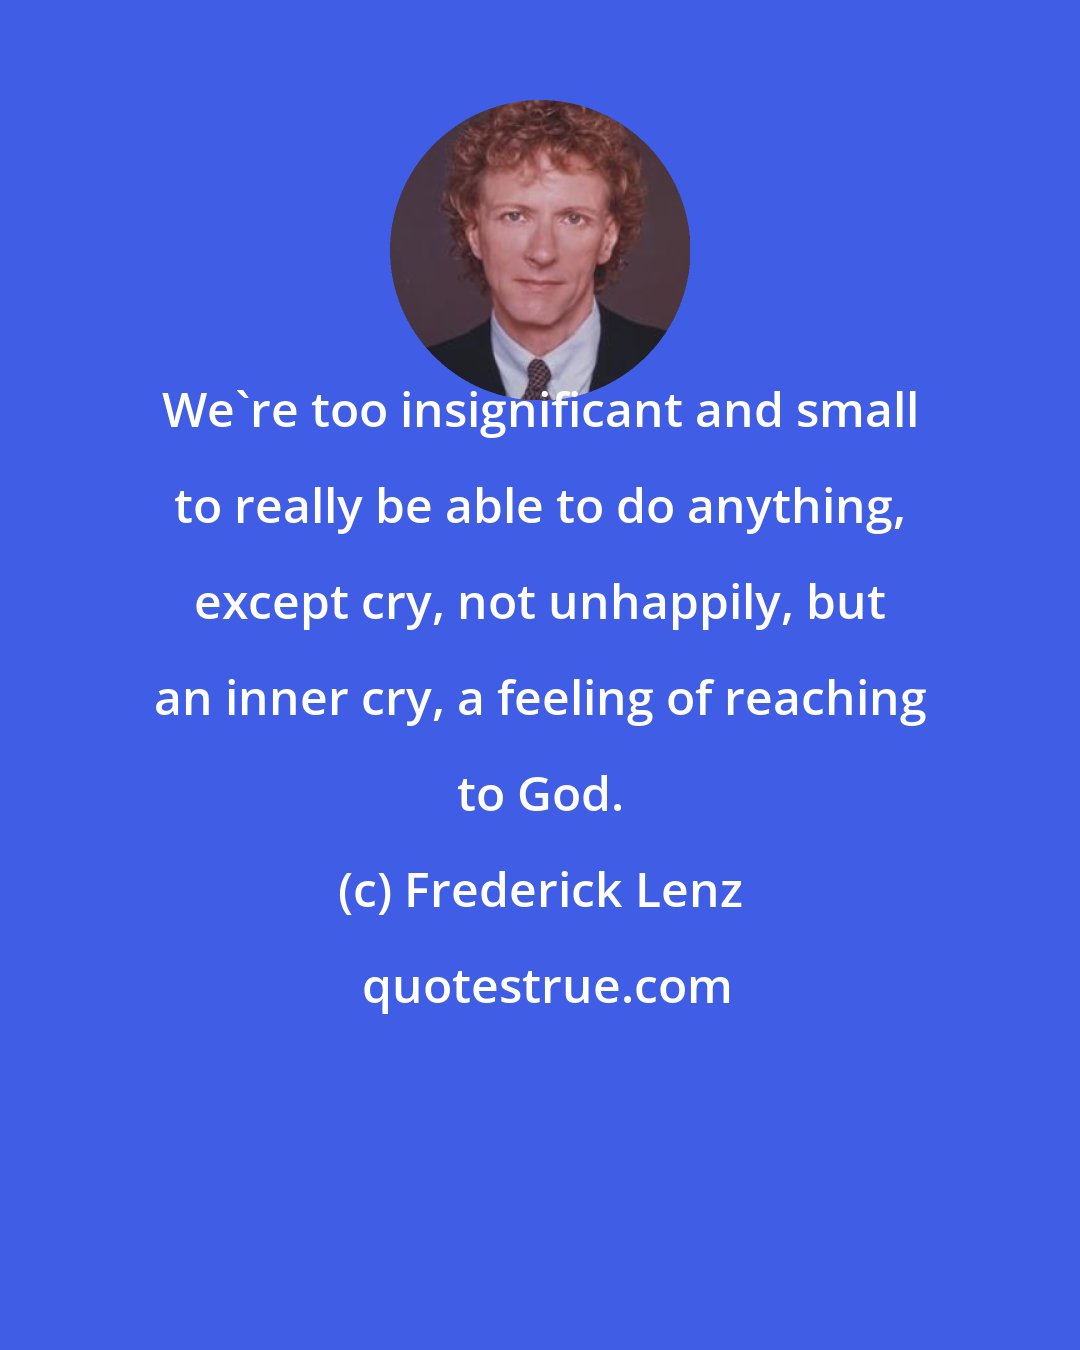 Frederick Lenz: We're too insignificant and small to really be able to do anything, except cry, not unhappily, but an inner cry, a feeling of reaching to God.